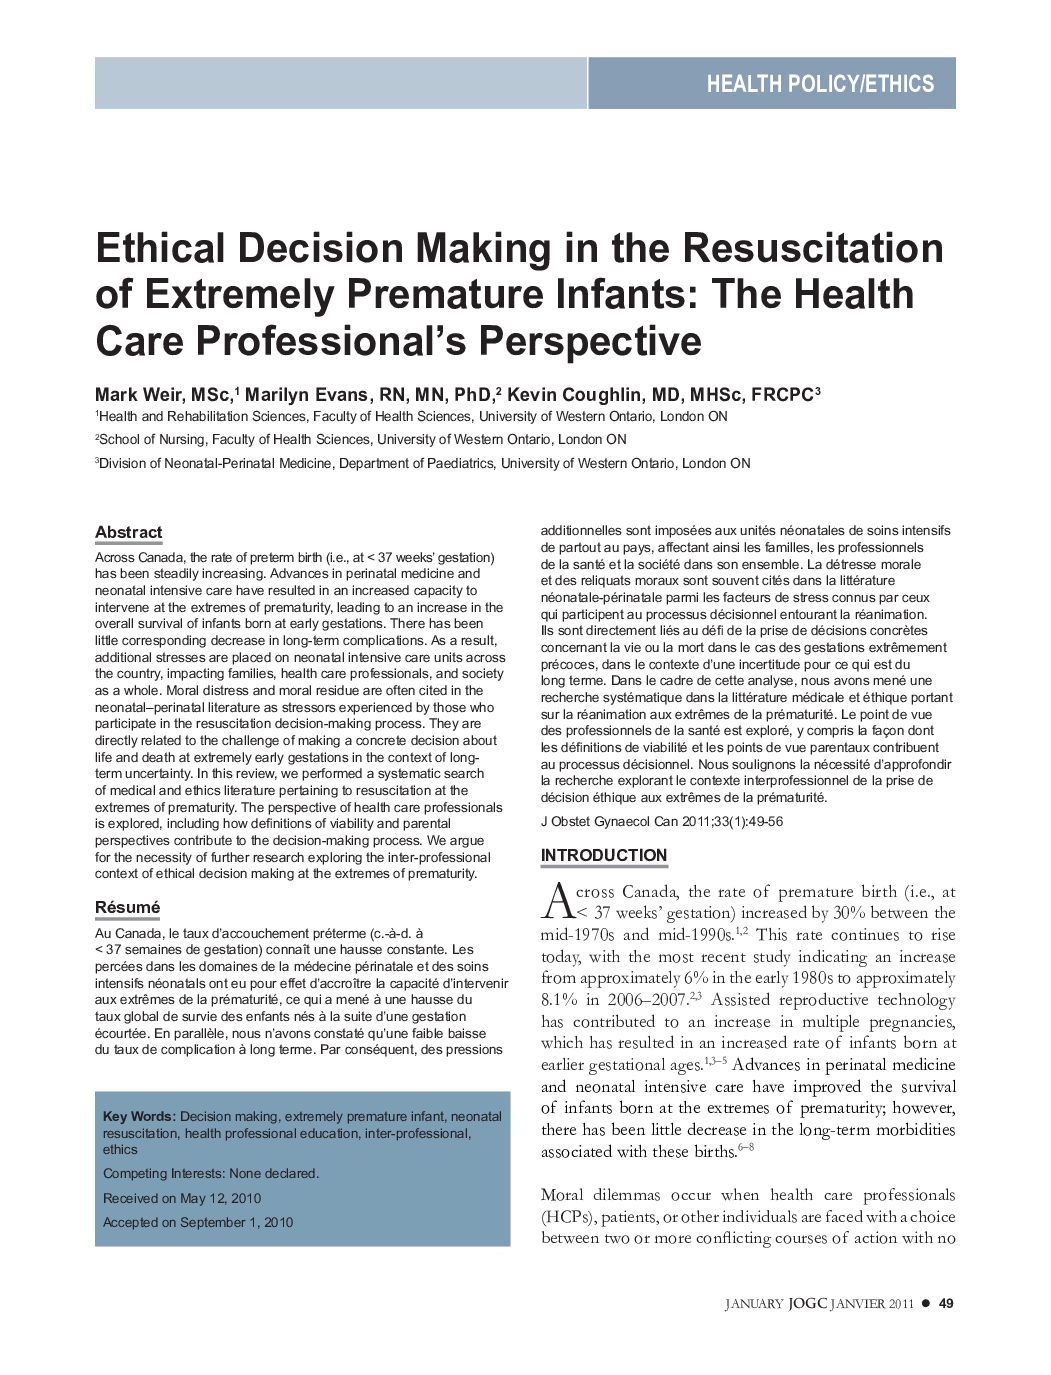 Ethical Decision Making in the Resuscitation of Extremely Premature Infants: The Health Care Professional's Perspective